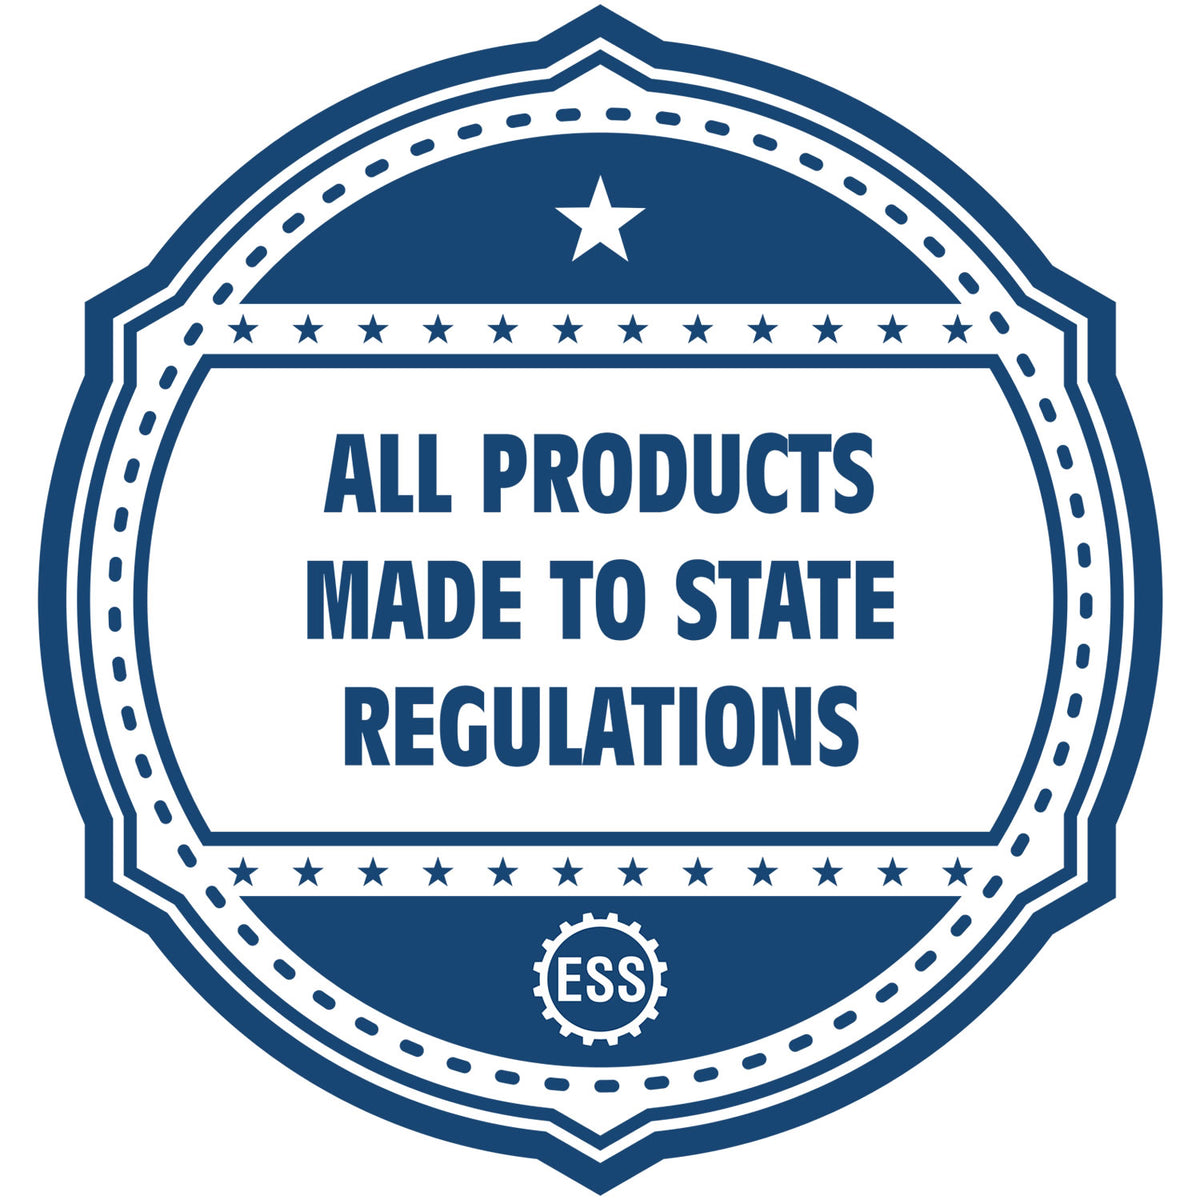 An icon or badge element for the Slim Pre-Inked Connecticut Professional Engineer Seal Stamp showing that this product is made in compliance with state regulations.